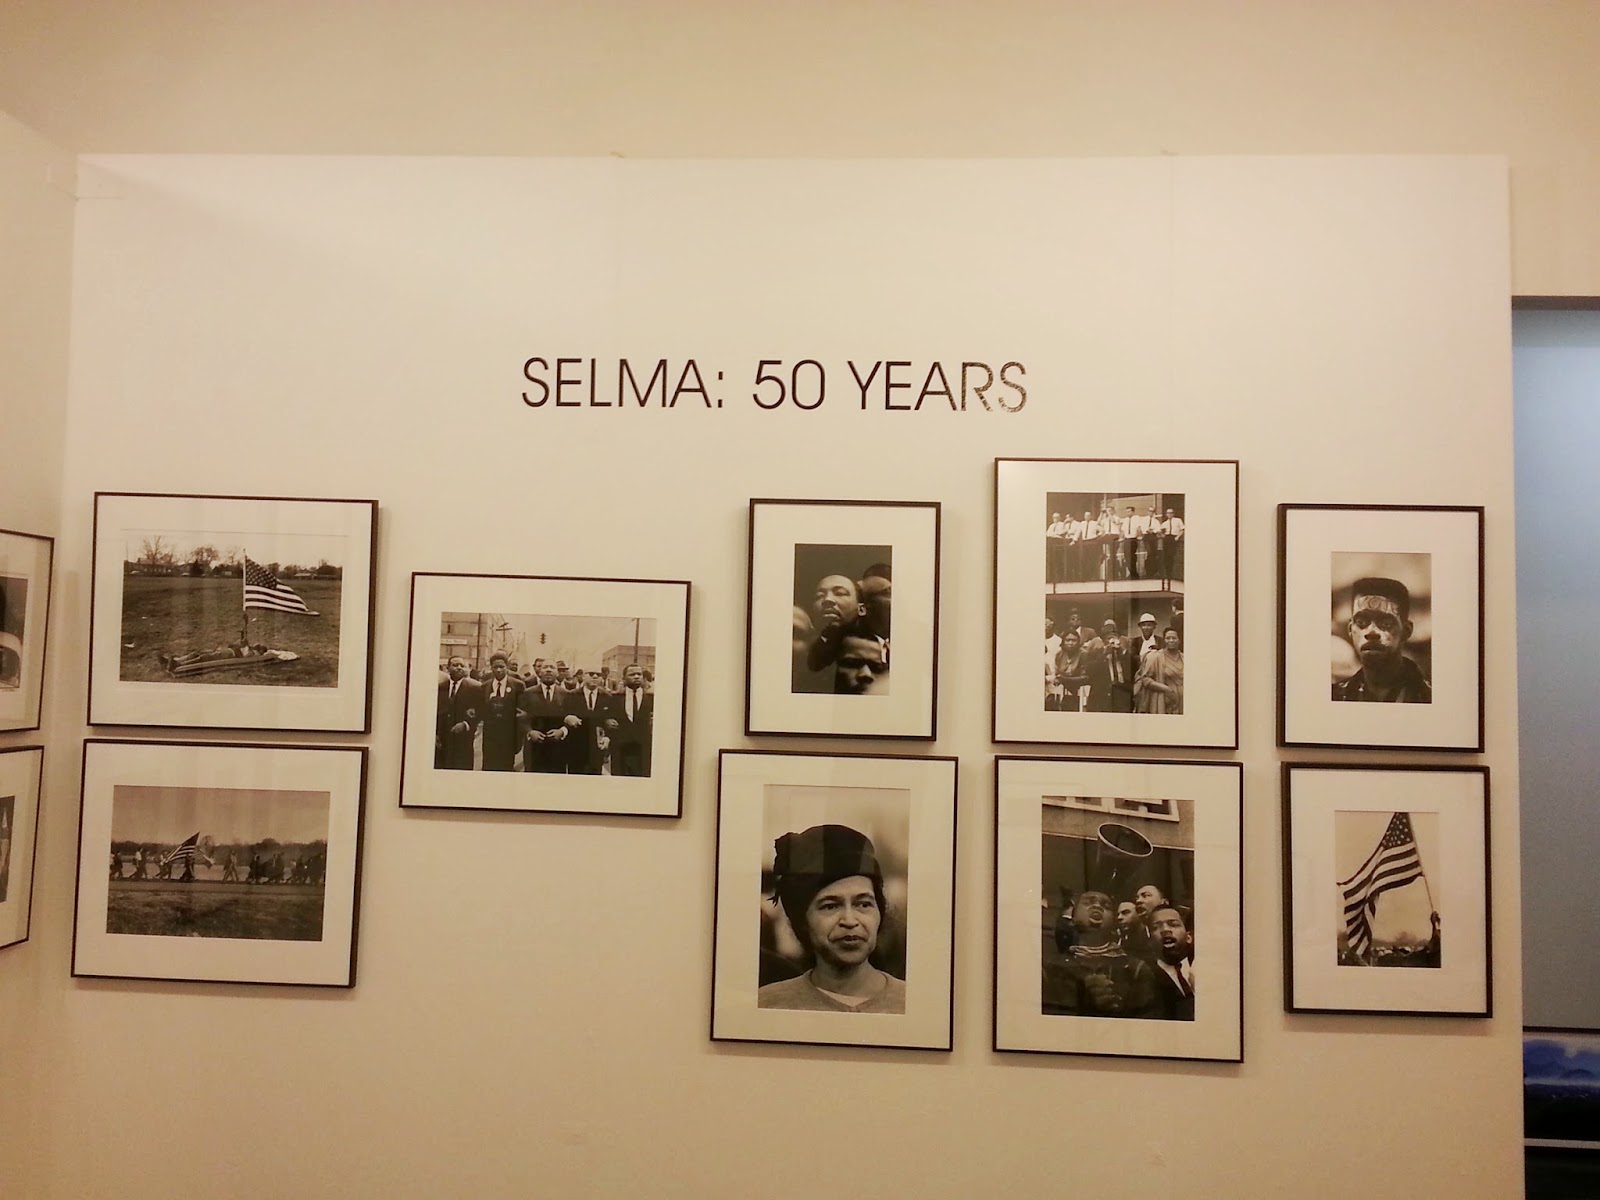 Image #1 for SELMA: 50 YEARS